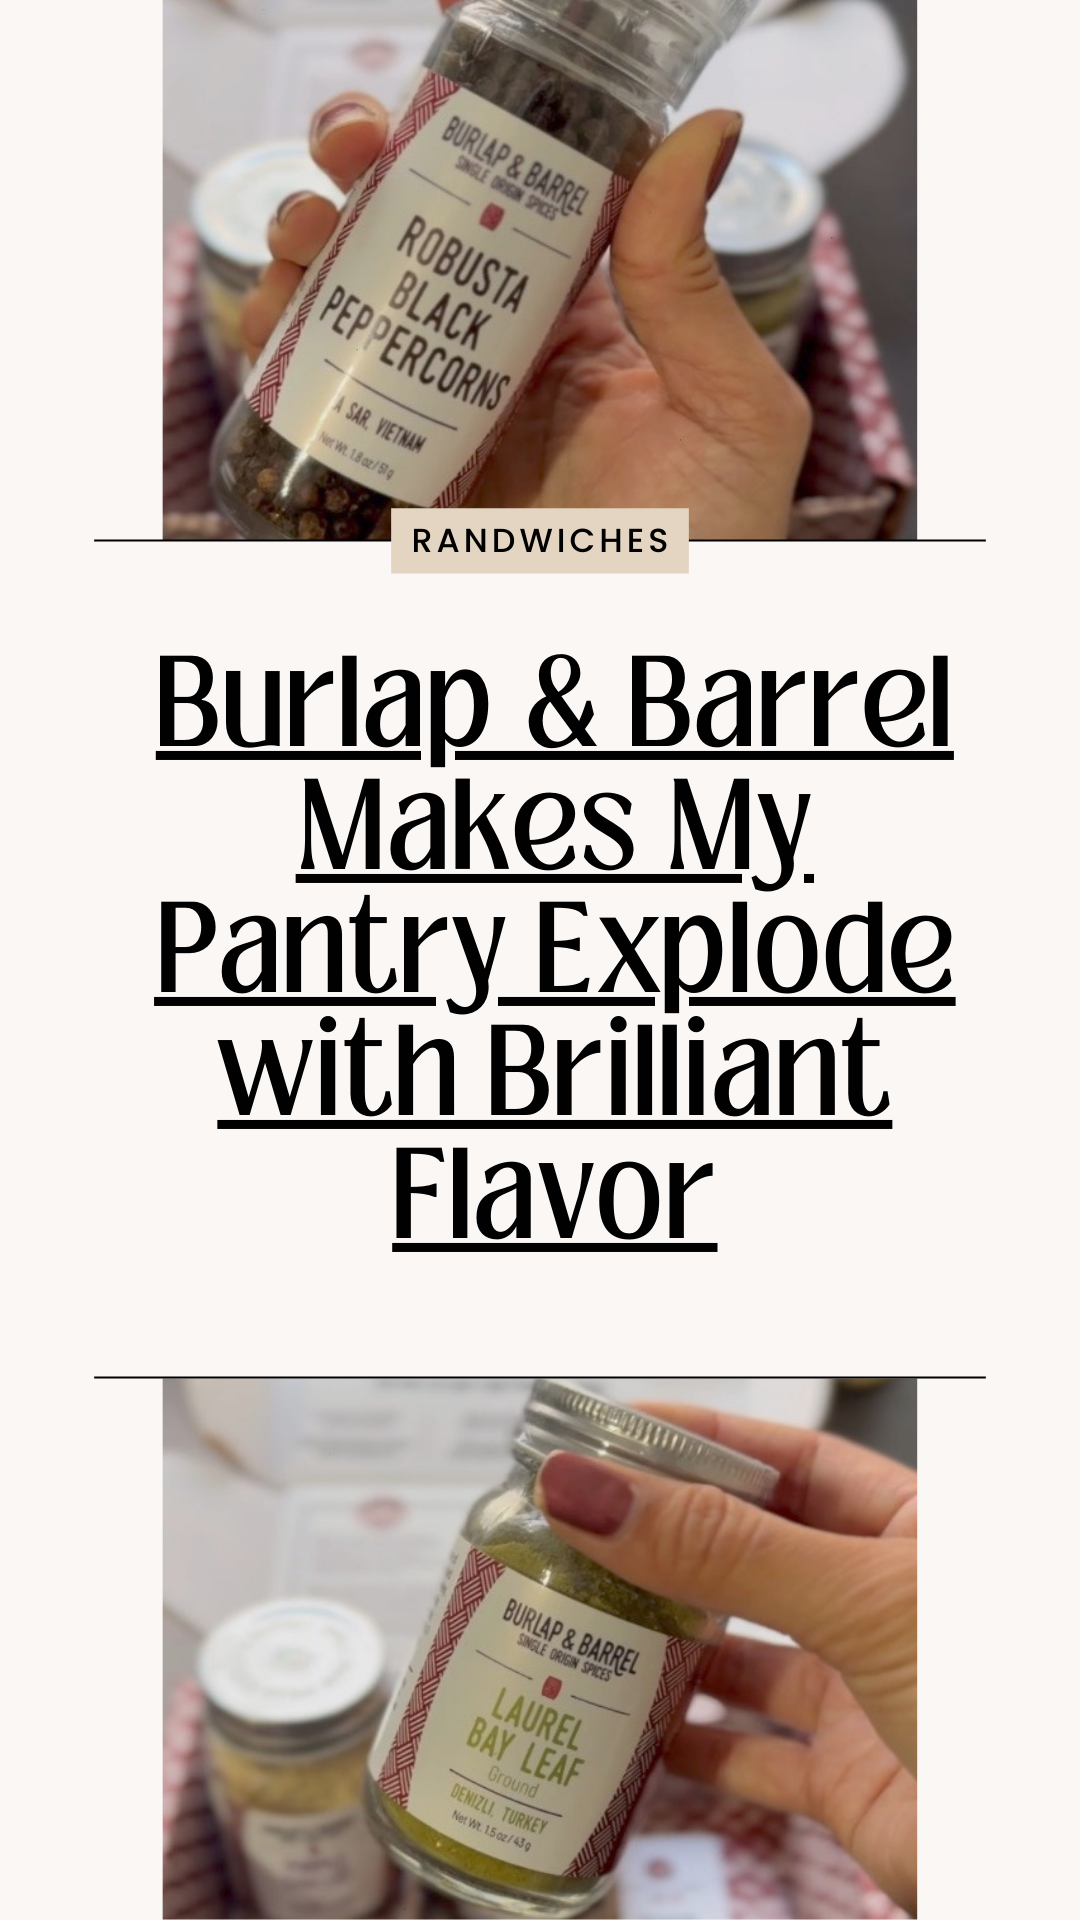 Burlap & Barrel Makes My Pantry Explode with Brilliant Flavor